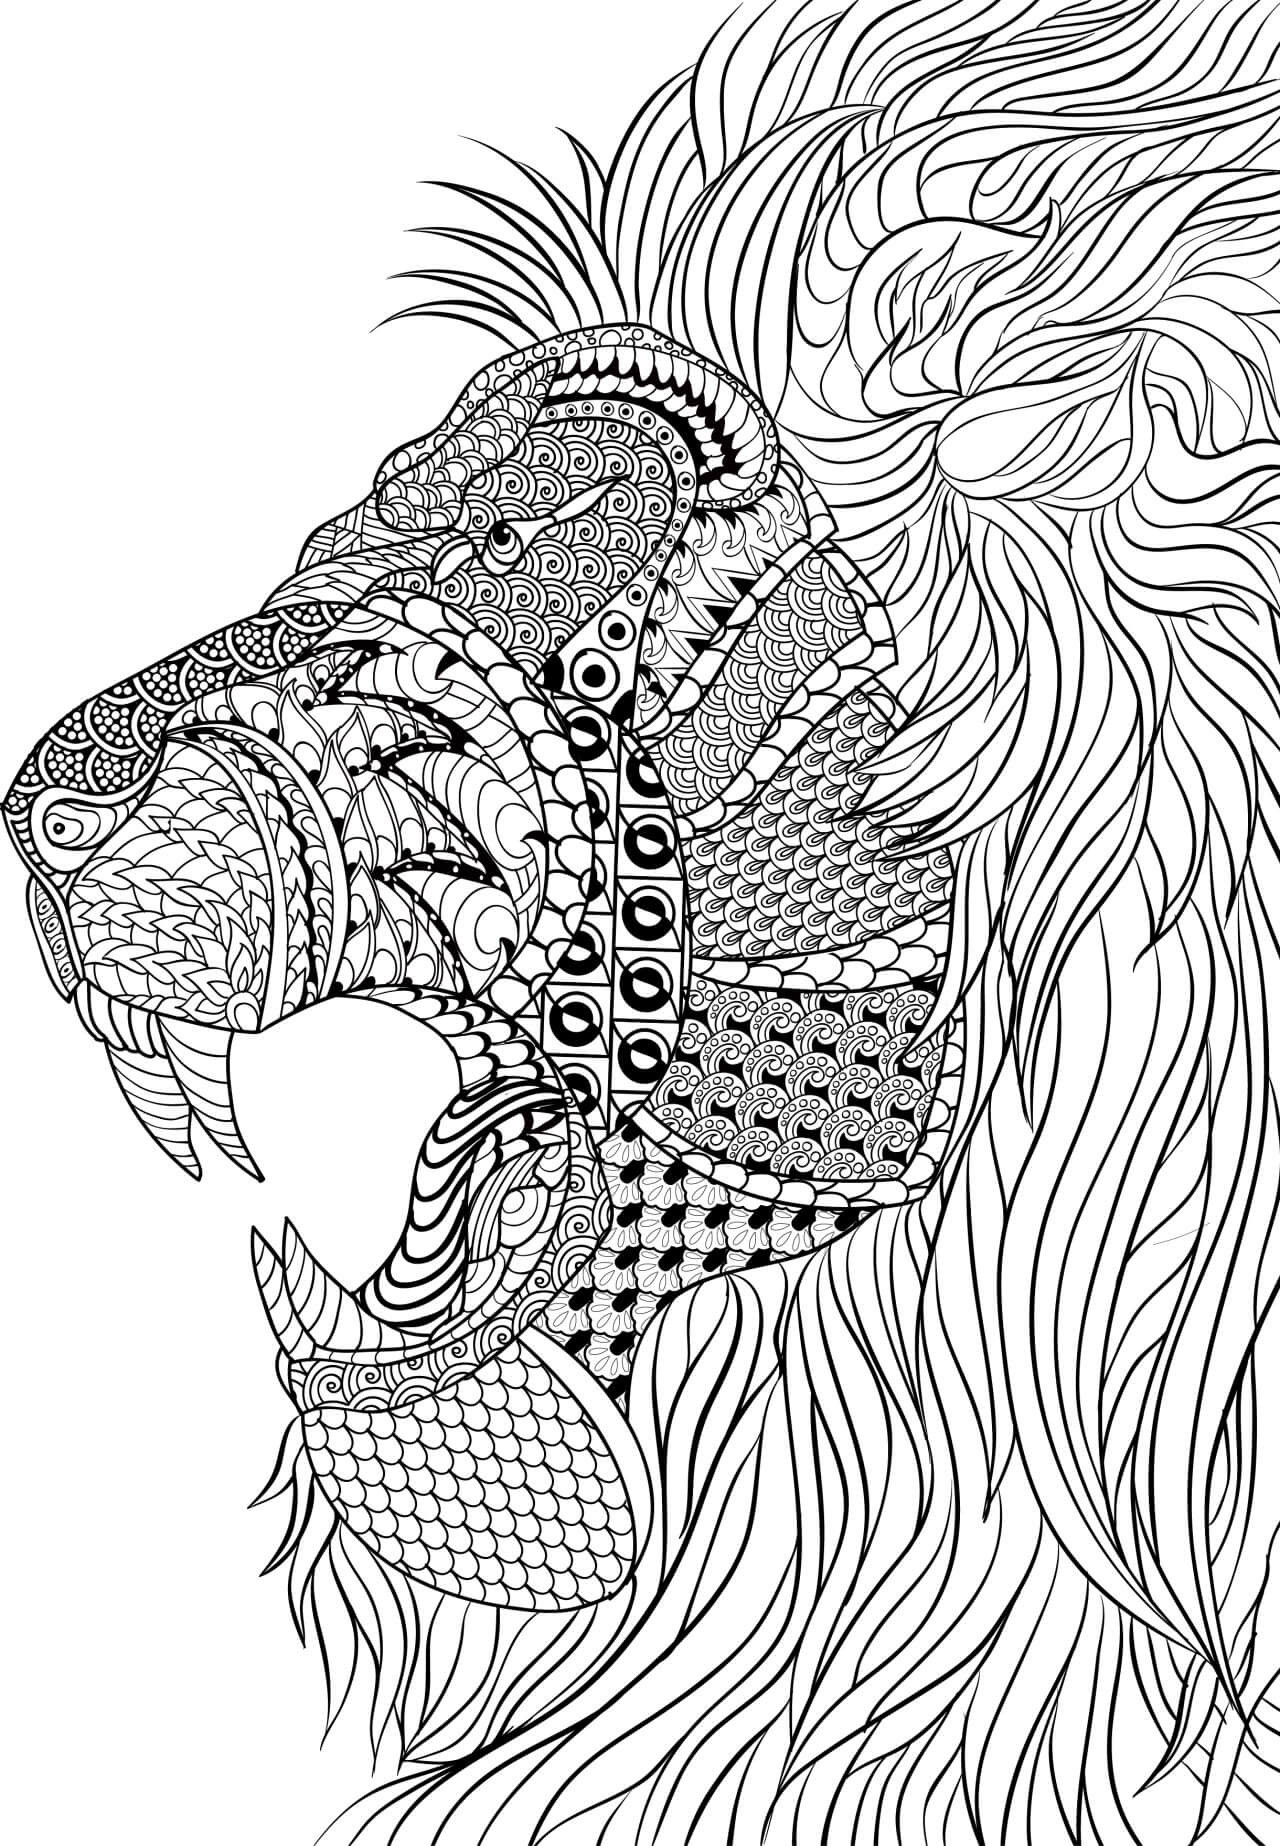 Coloring Pages For Adults Animals
 Coloring Pages For Adults Difficult Animals 4